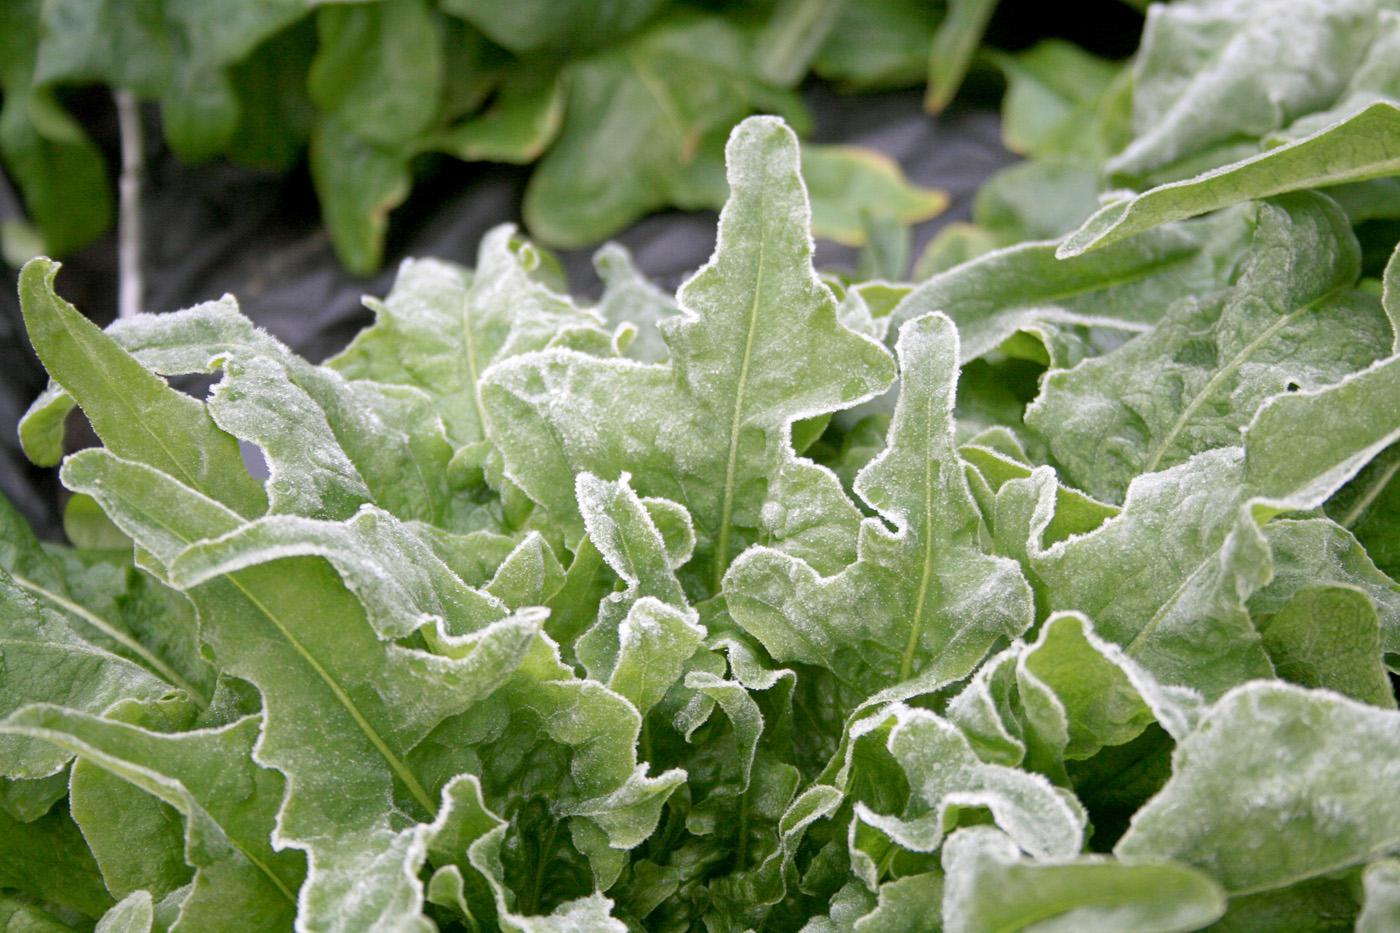 Many garden plants can tolerate frost, such as this cool season lettuce coated with frost. (Photo by Gary Bachman)